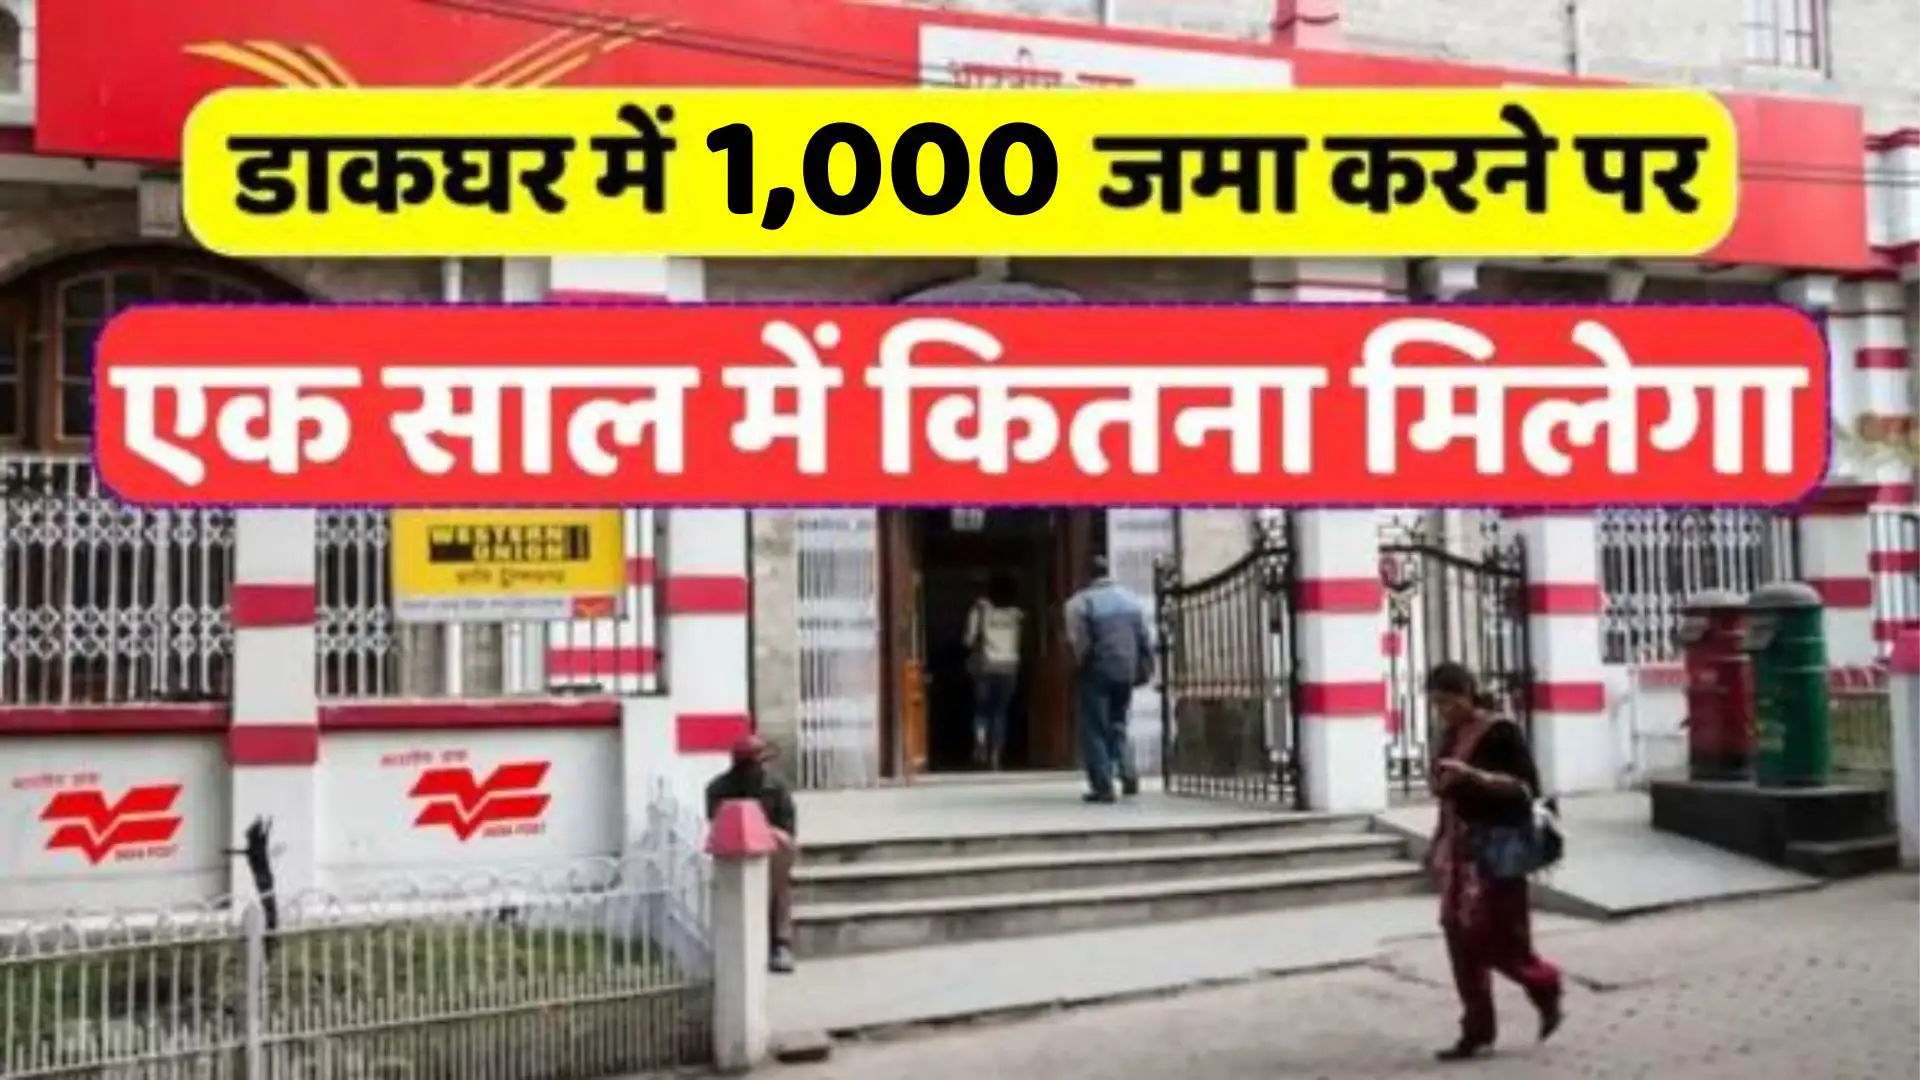 Post Office Scheme How much will you get in 5 years by depositing ₹ 1,000 in the post office, see calculation